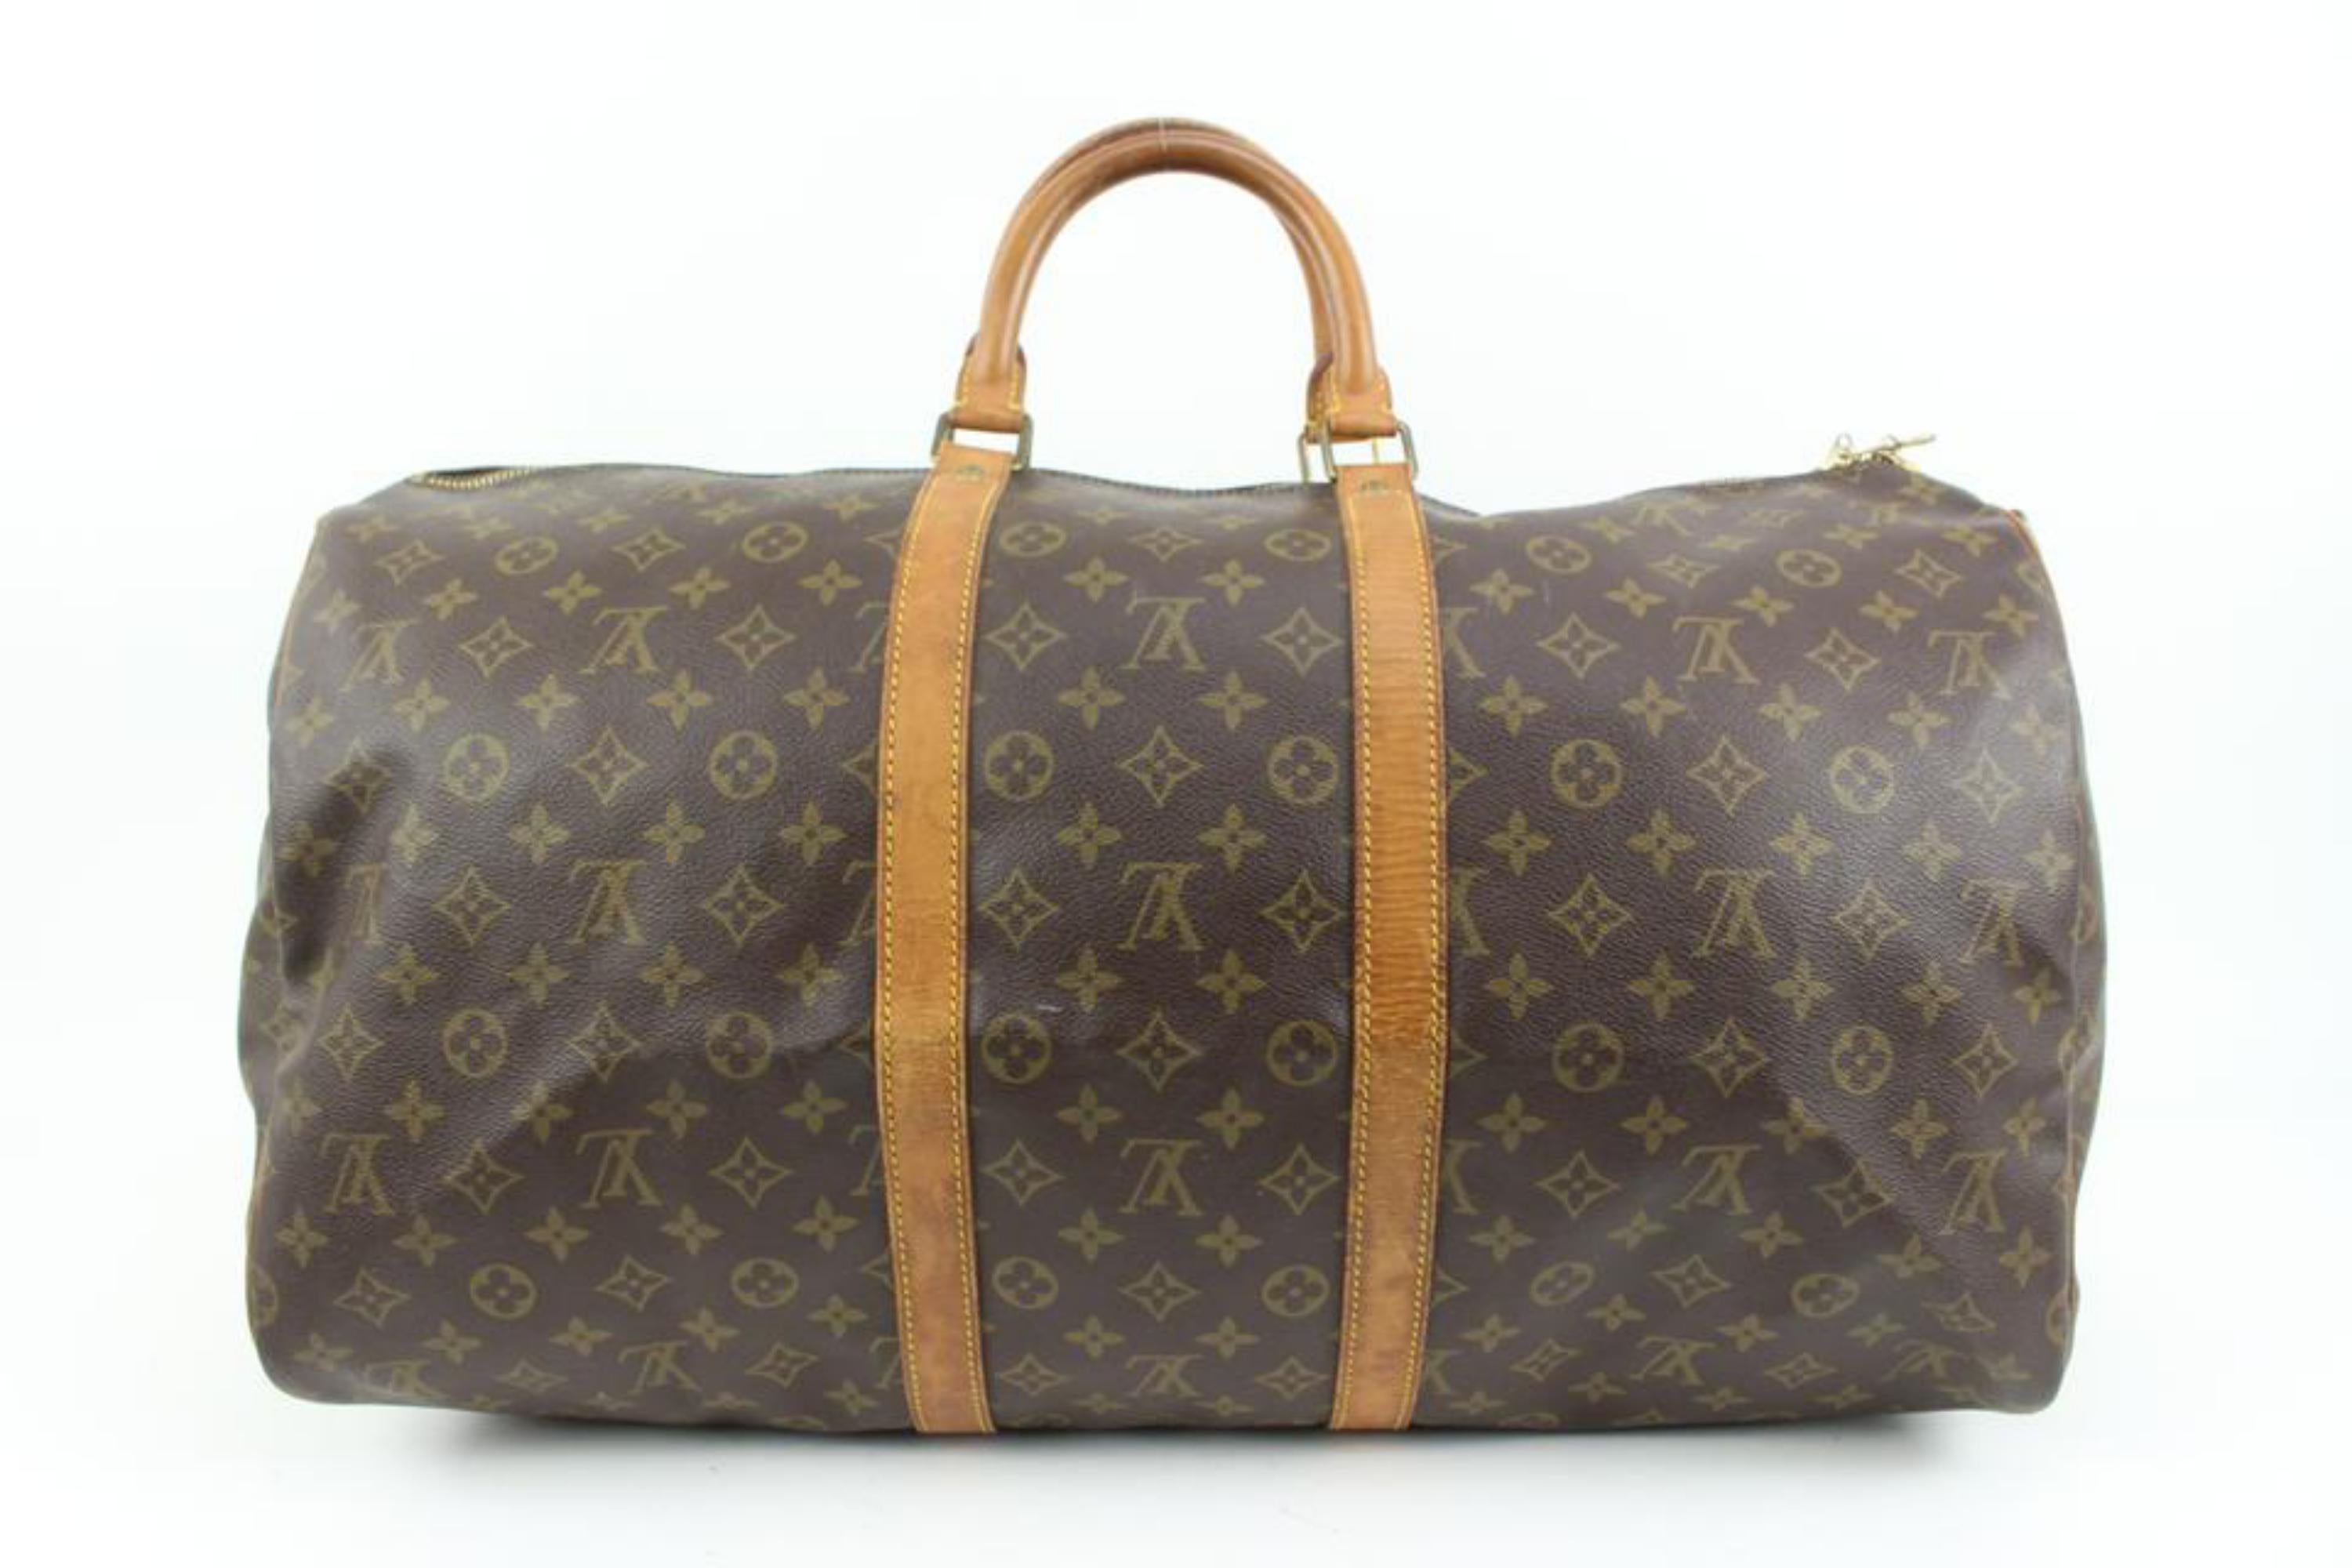 Louis Vuitton Monogram Keepall Bandouliere 55 Boston Duffle Bag with Strap  In Fair Condition For Sale In Dix hills, NY